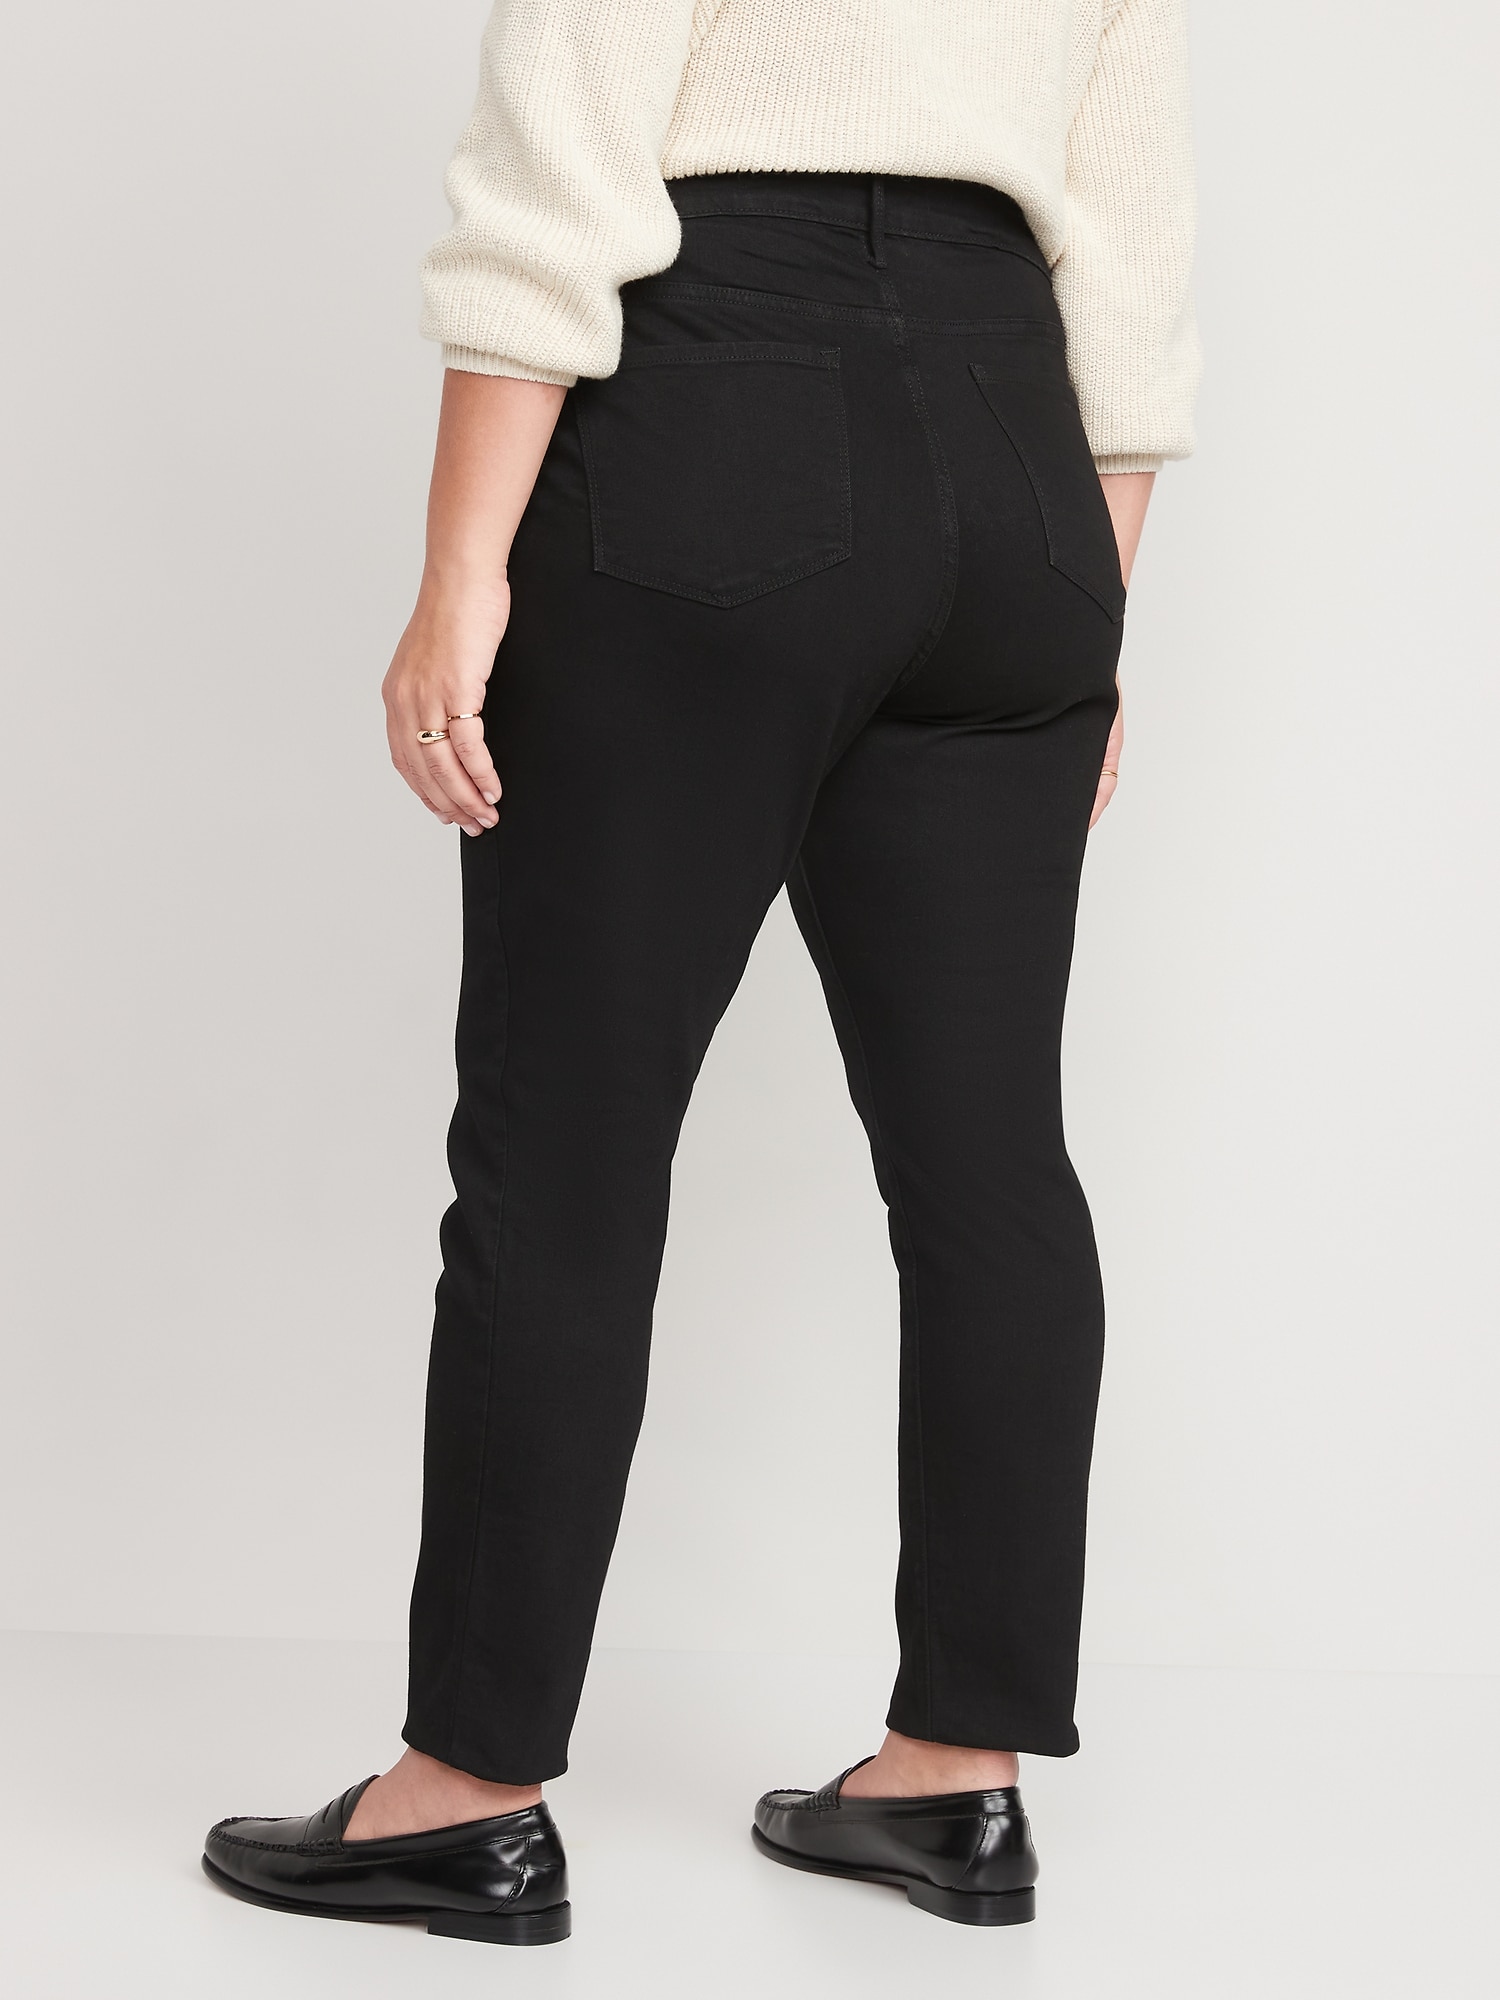 Tall Super High Waisted Power Stretch Skinny Jeans